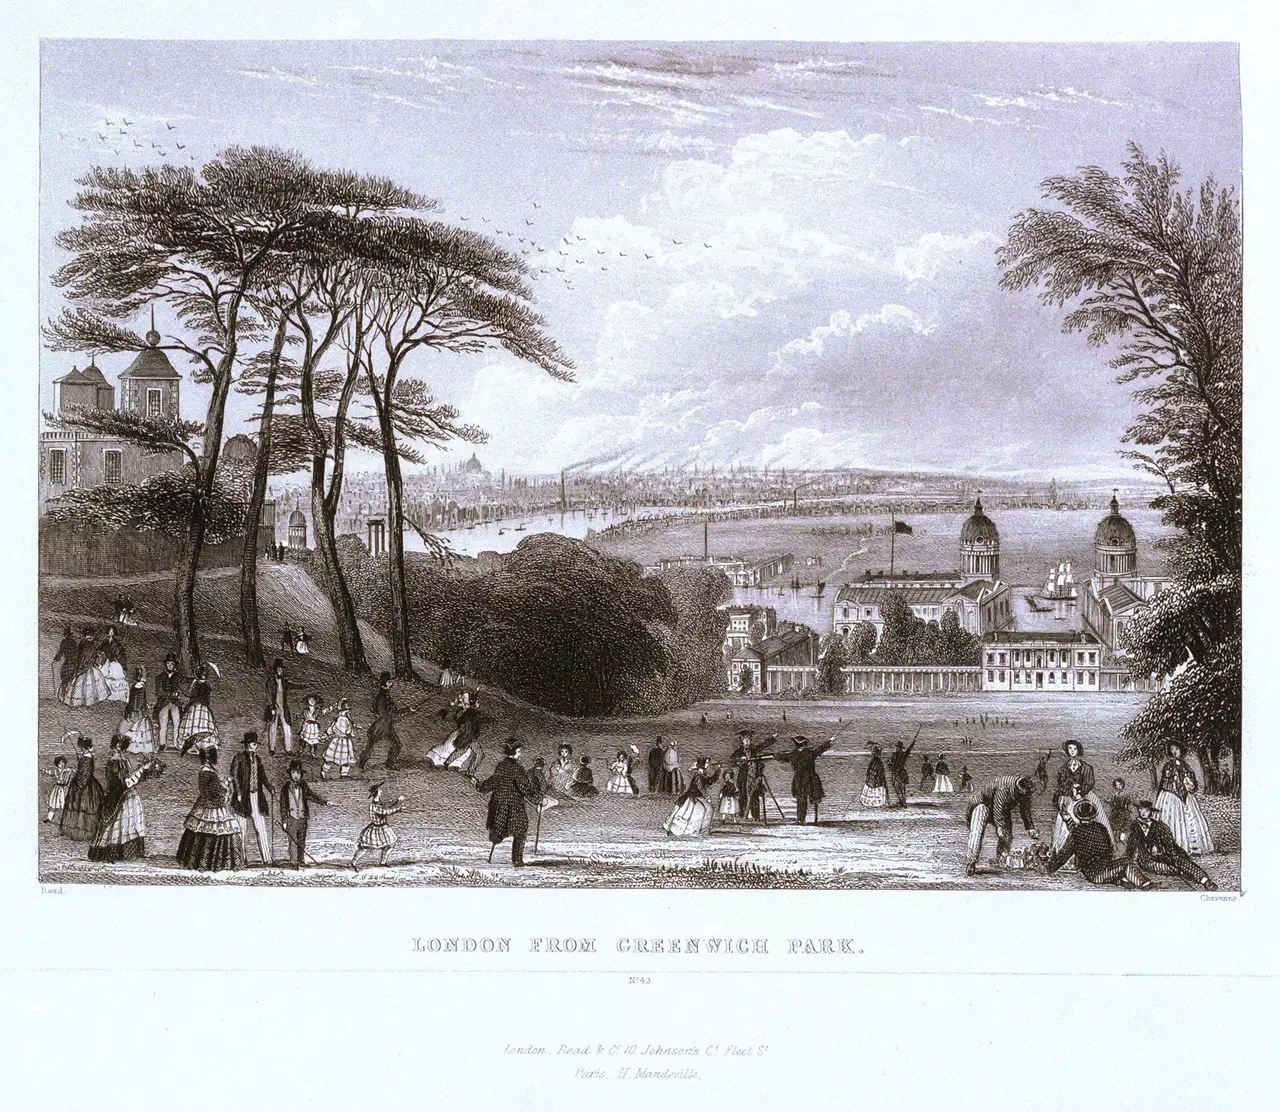 Painting of London from Greenwich Park by H. Mandeville, 1833